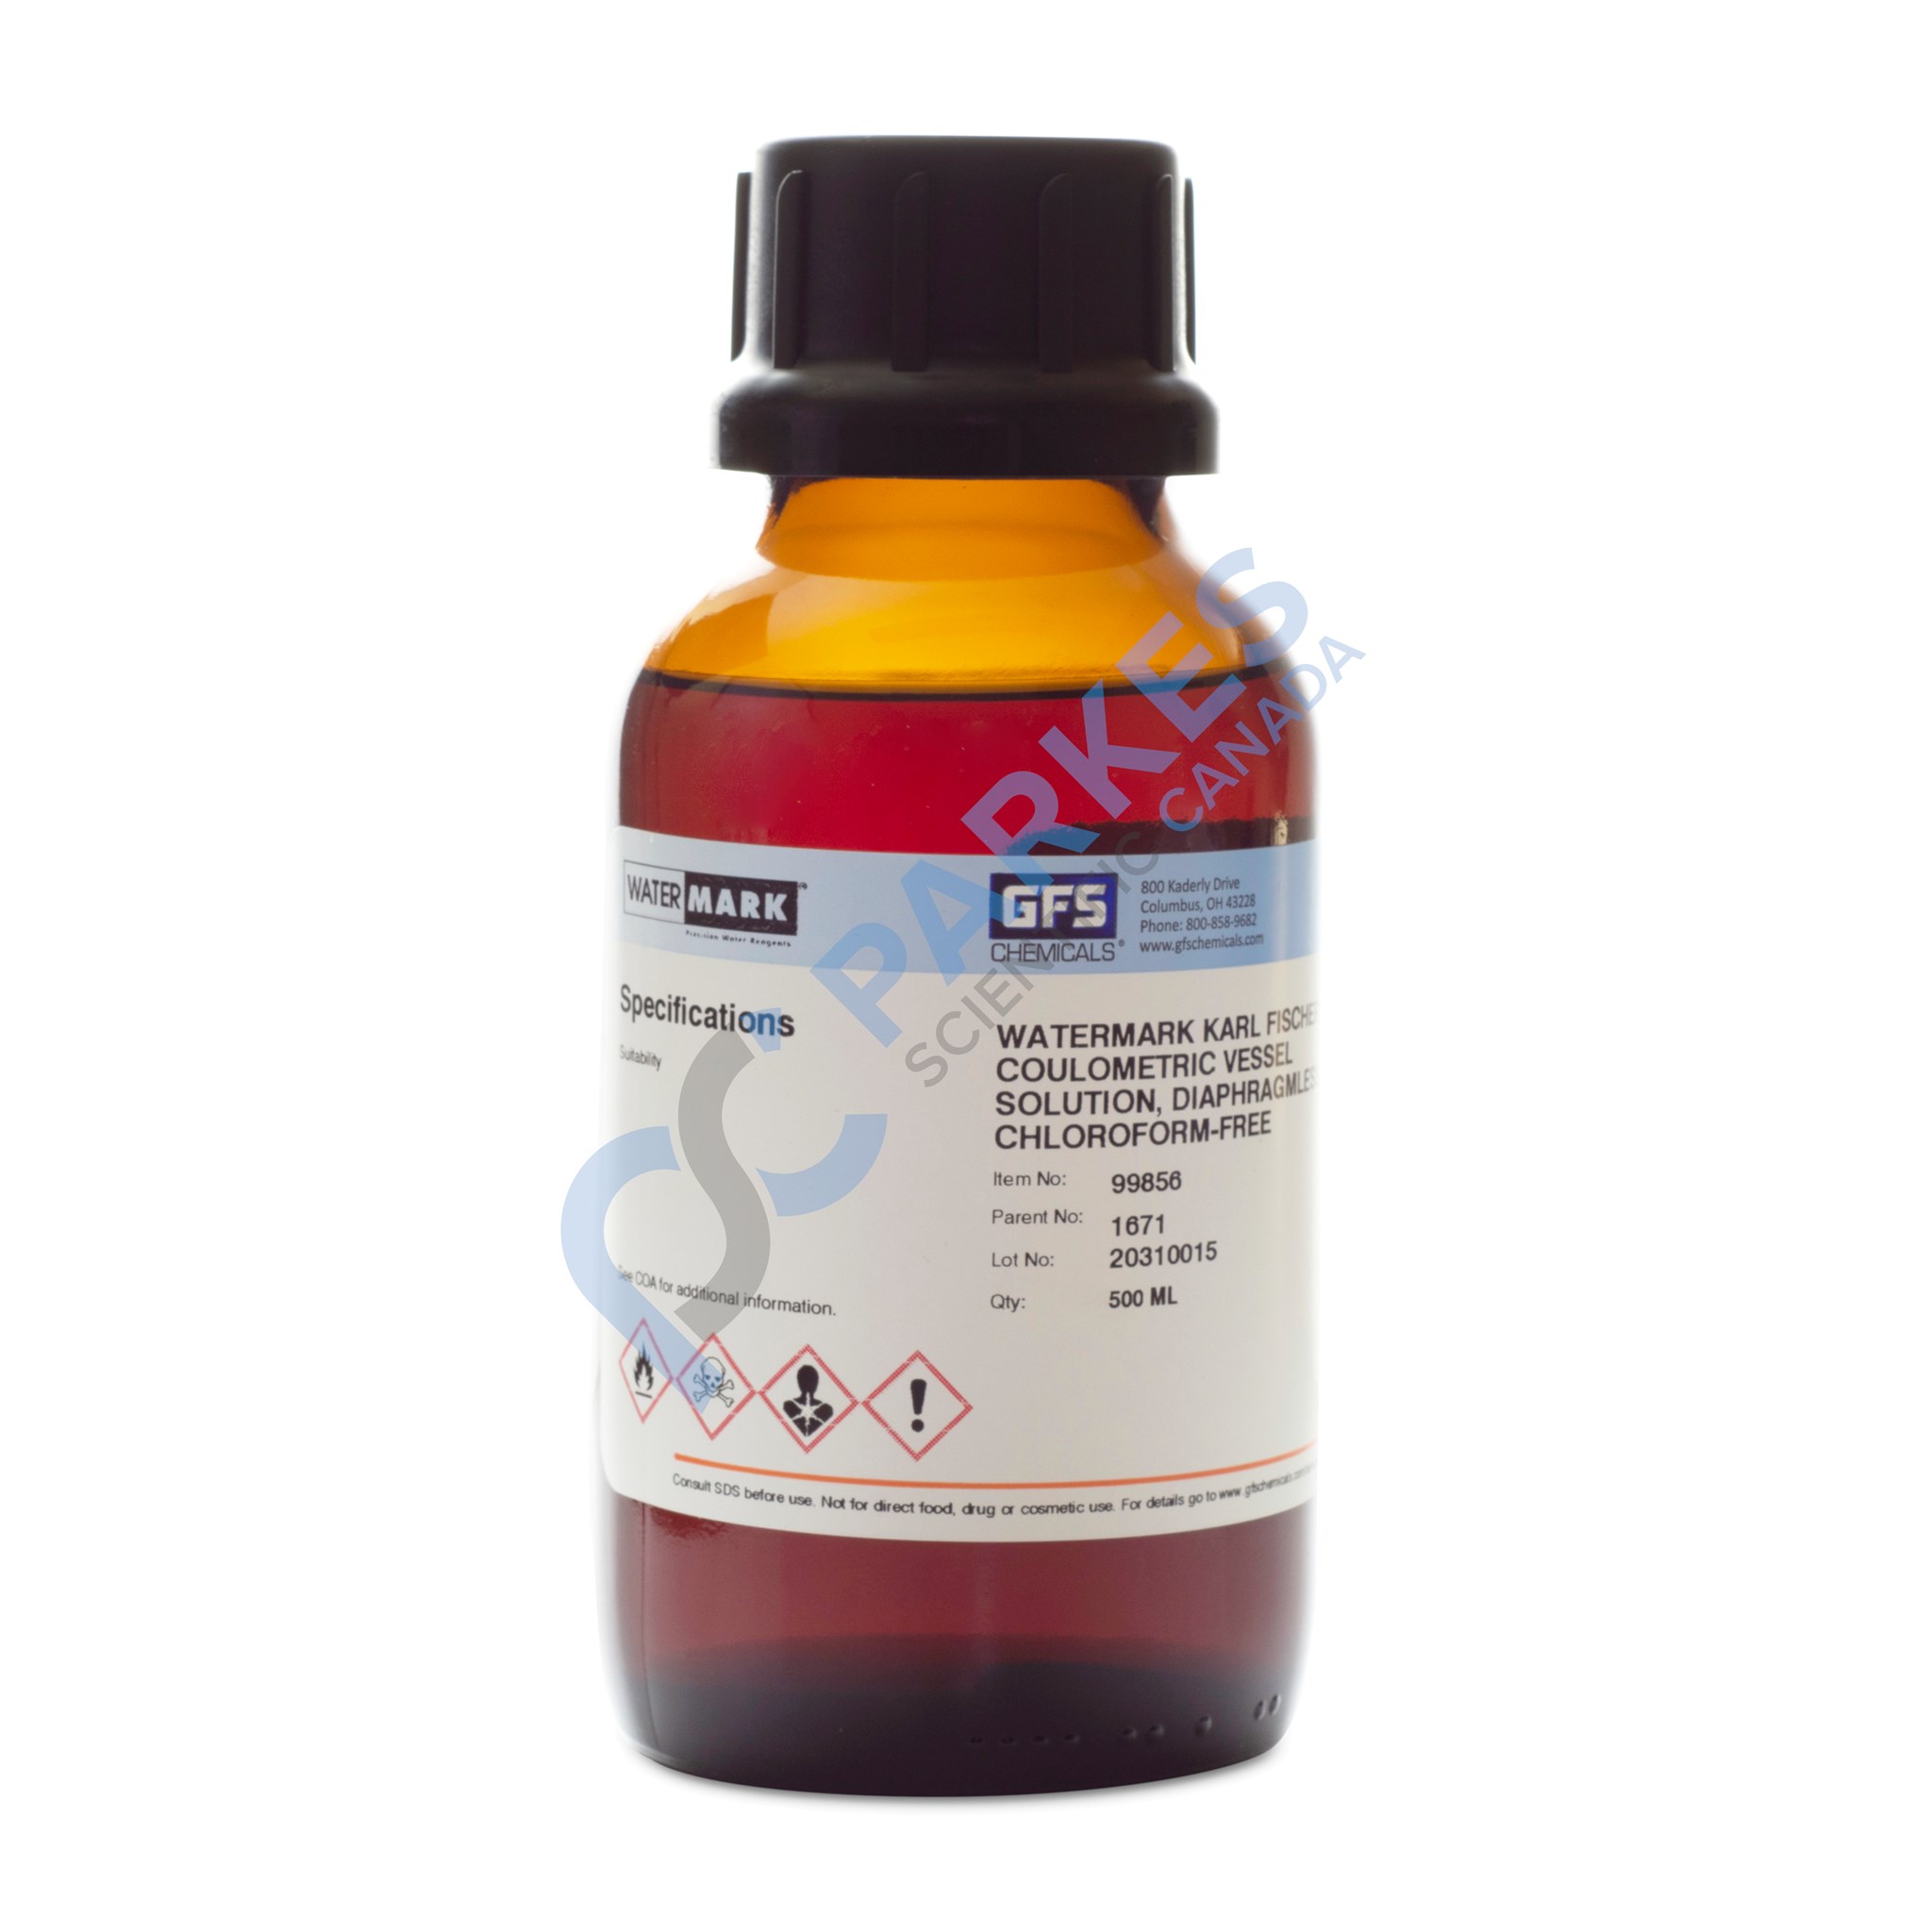 Watermark Karl Fischer Coulometric Reagent, Item #1671, Vessel Solution ...